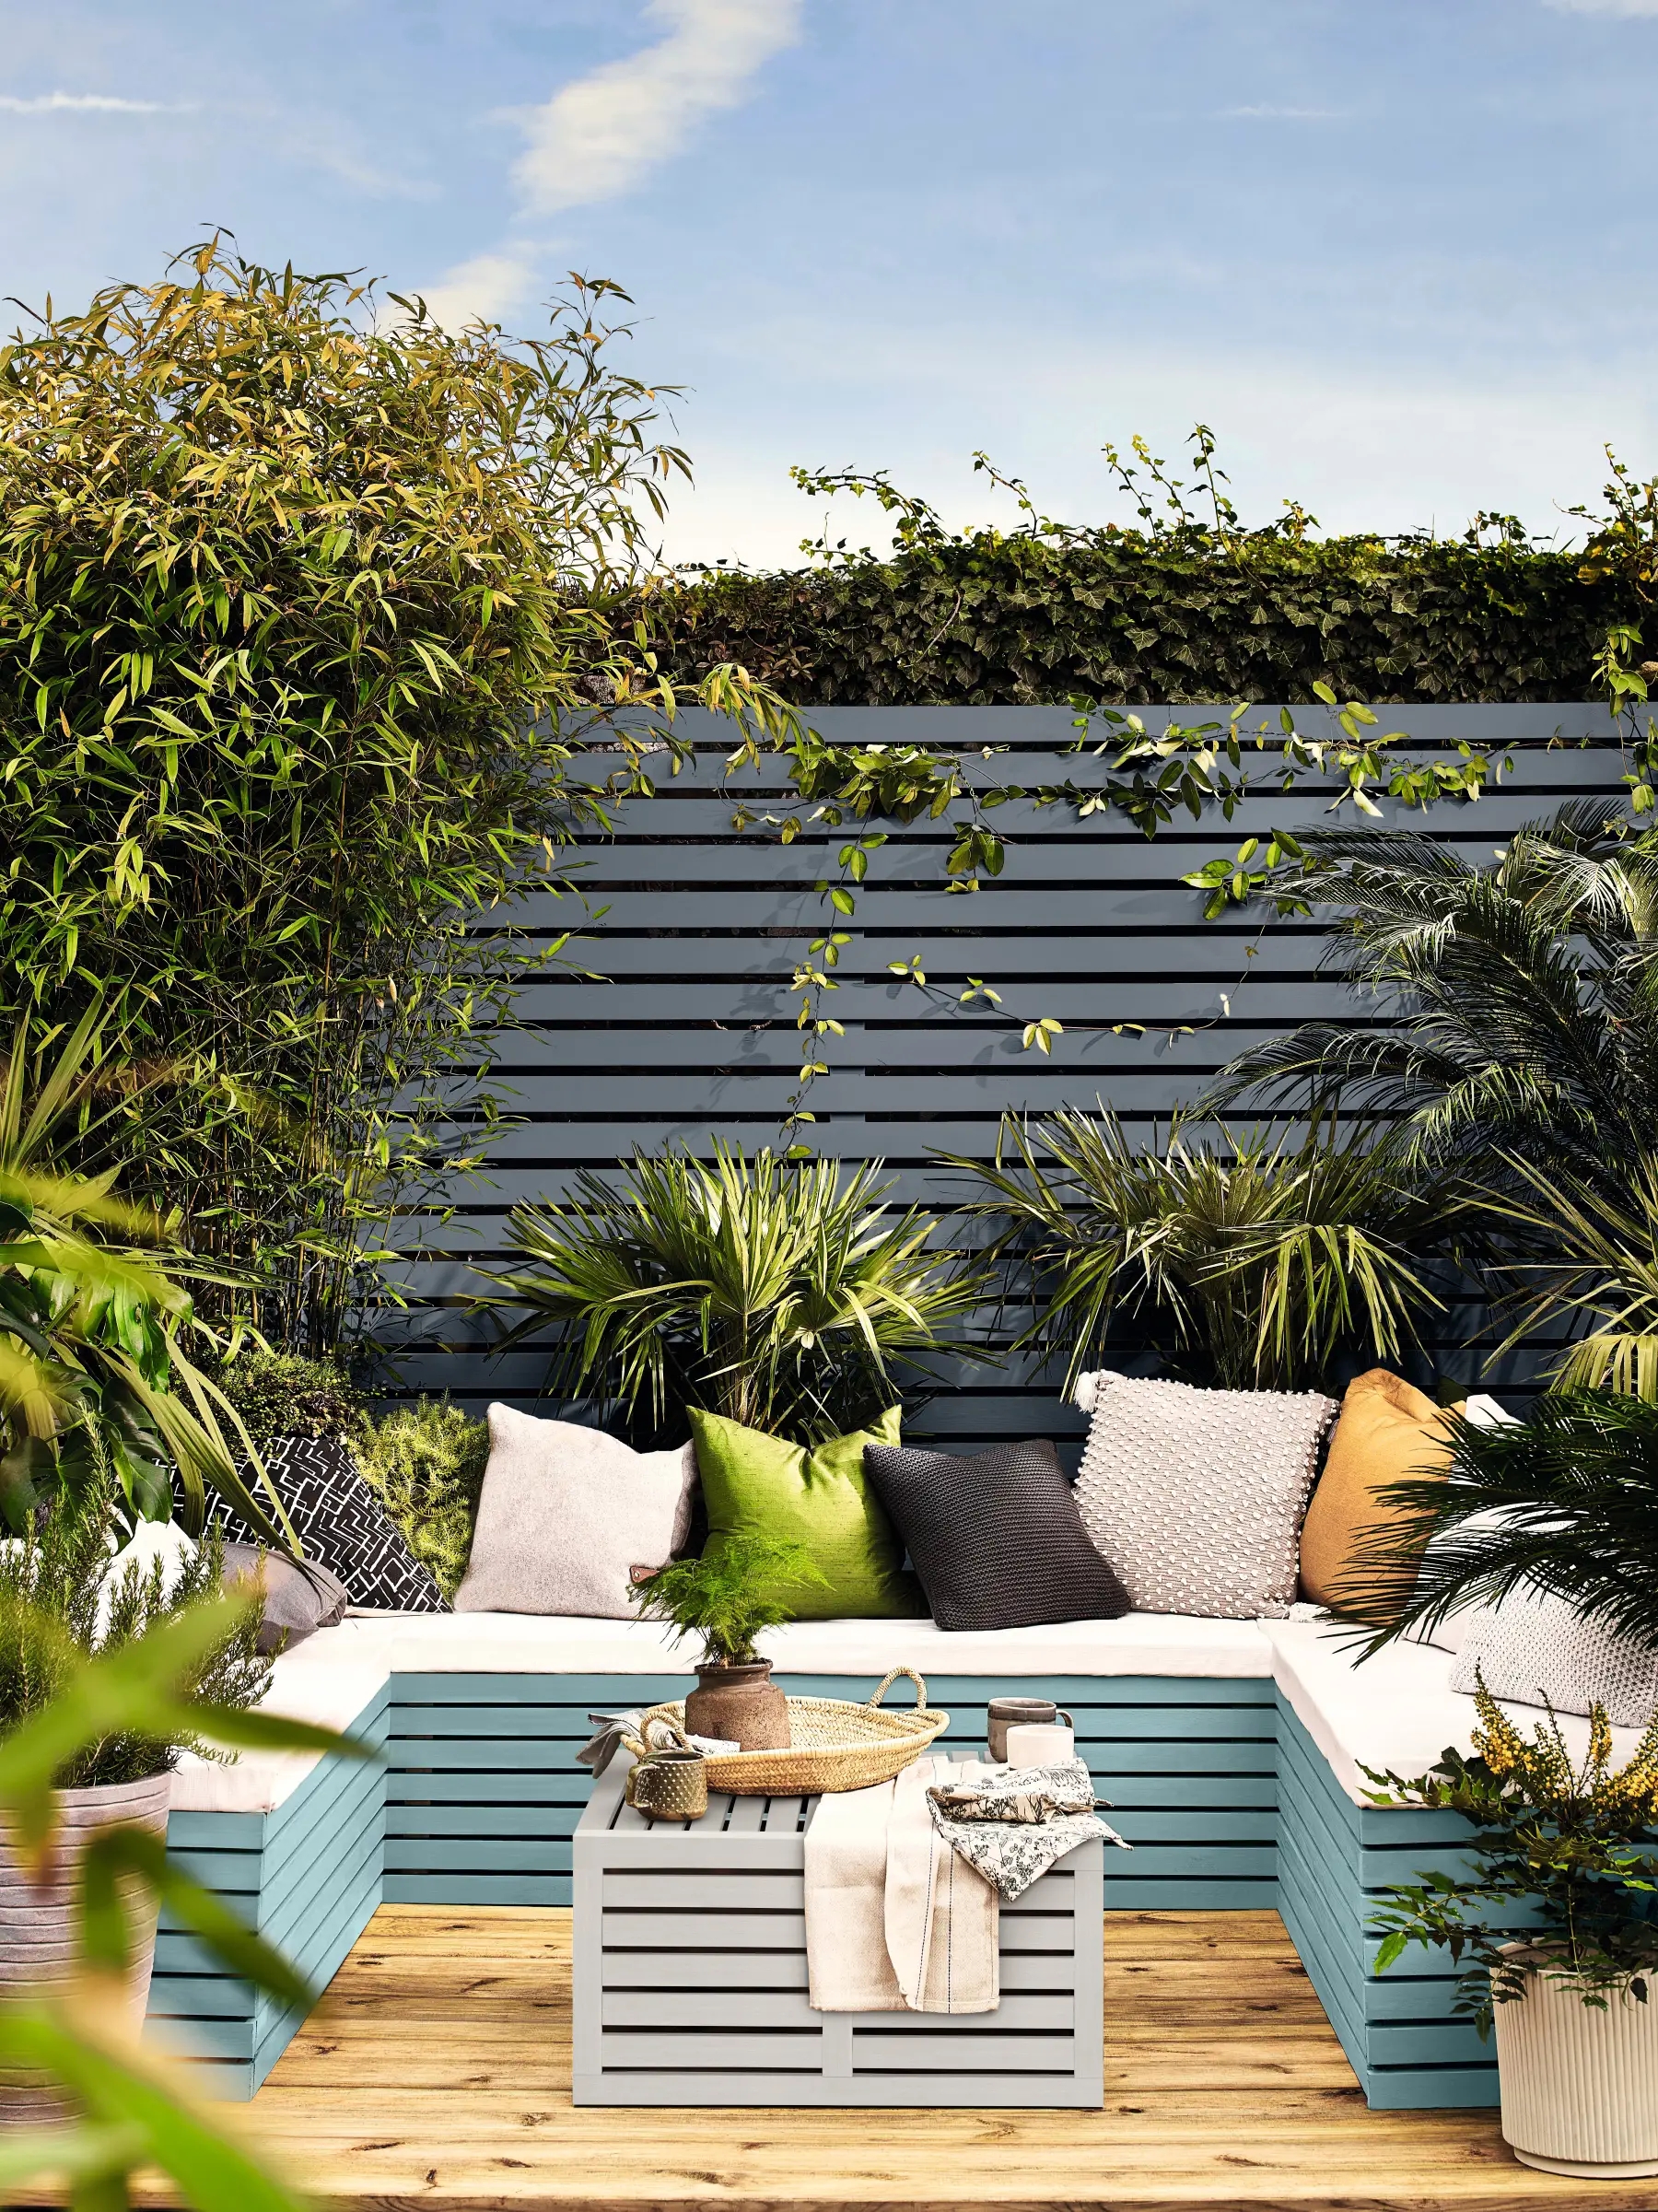 Give your garden a few more Shades.